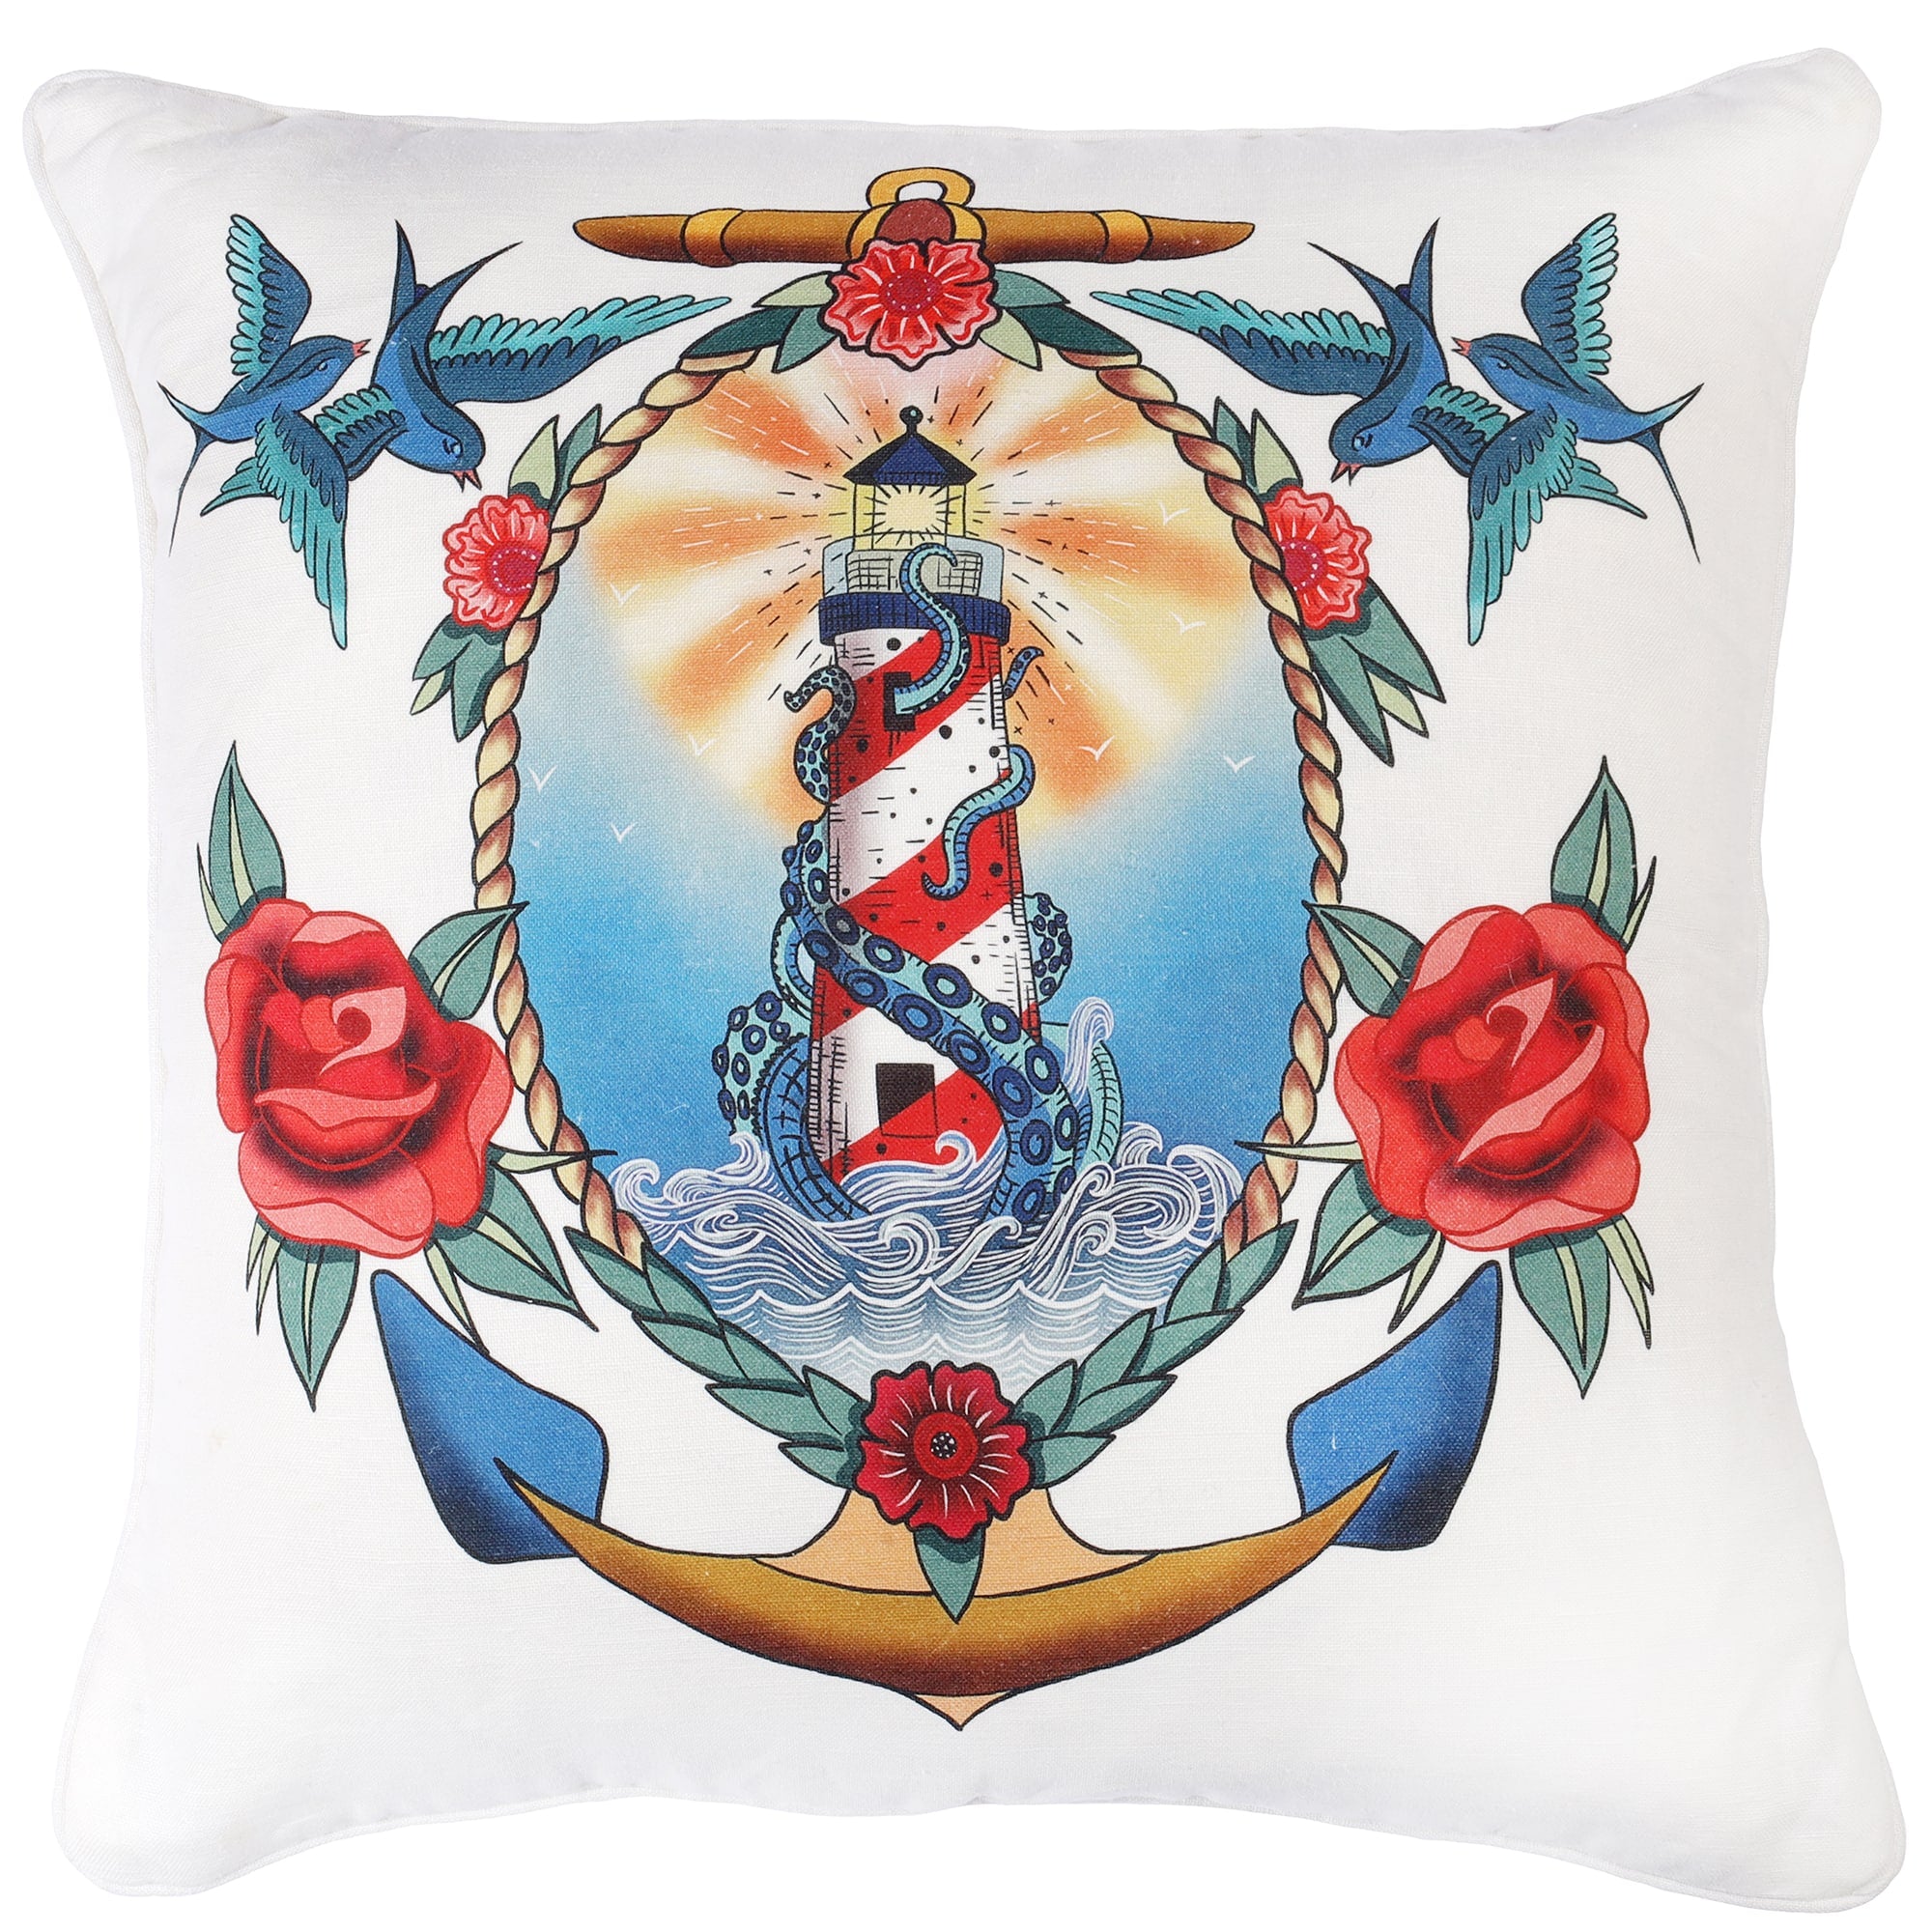 White cushion with brightly coloured tattoo inspired lighthouse and kraken design in a rope and anchor vignette with roses and swallows, on a white background.